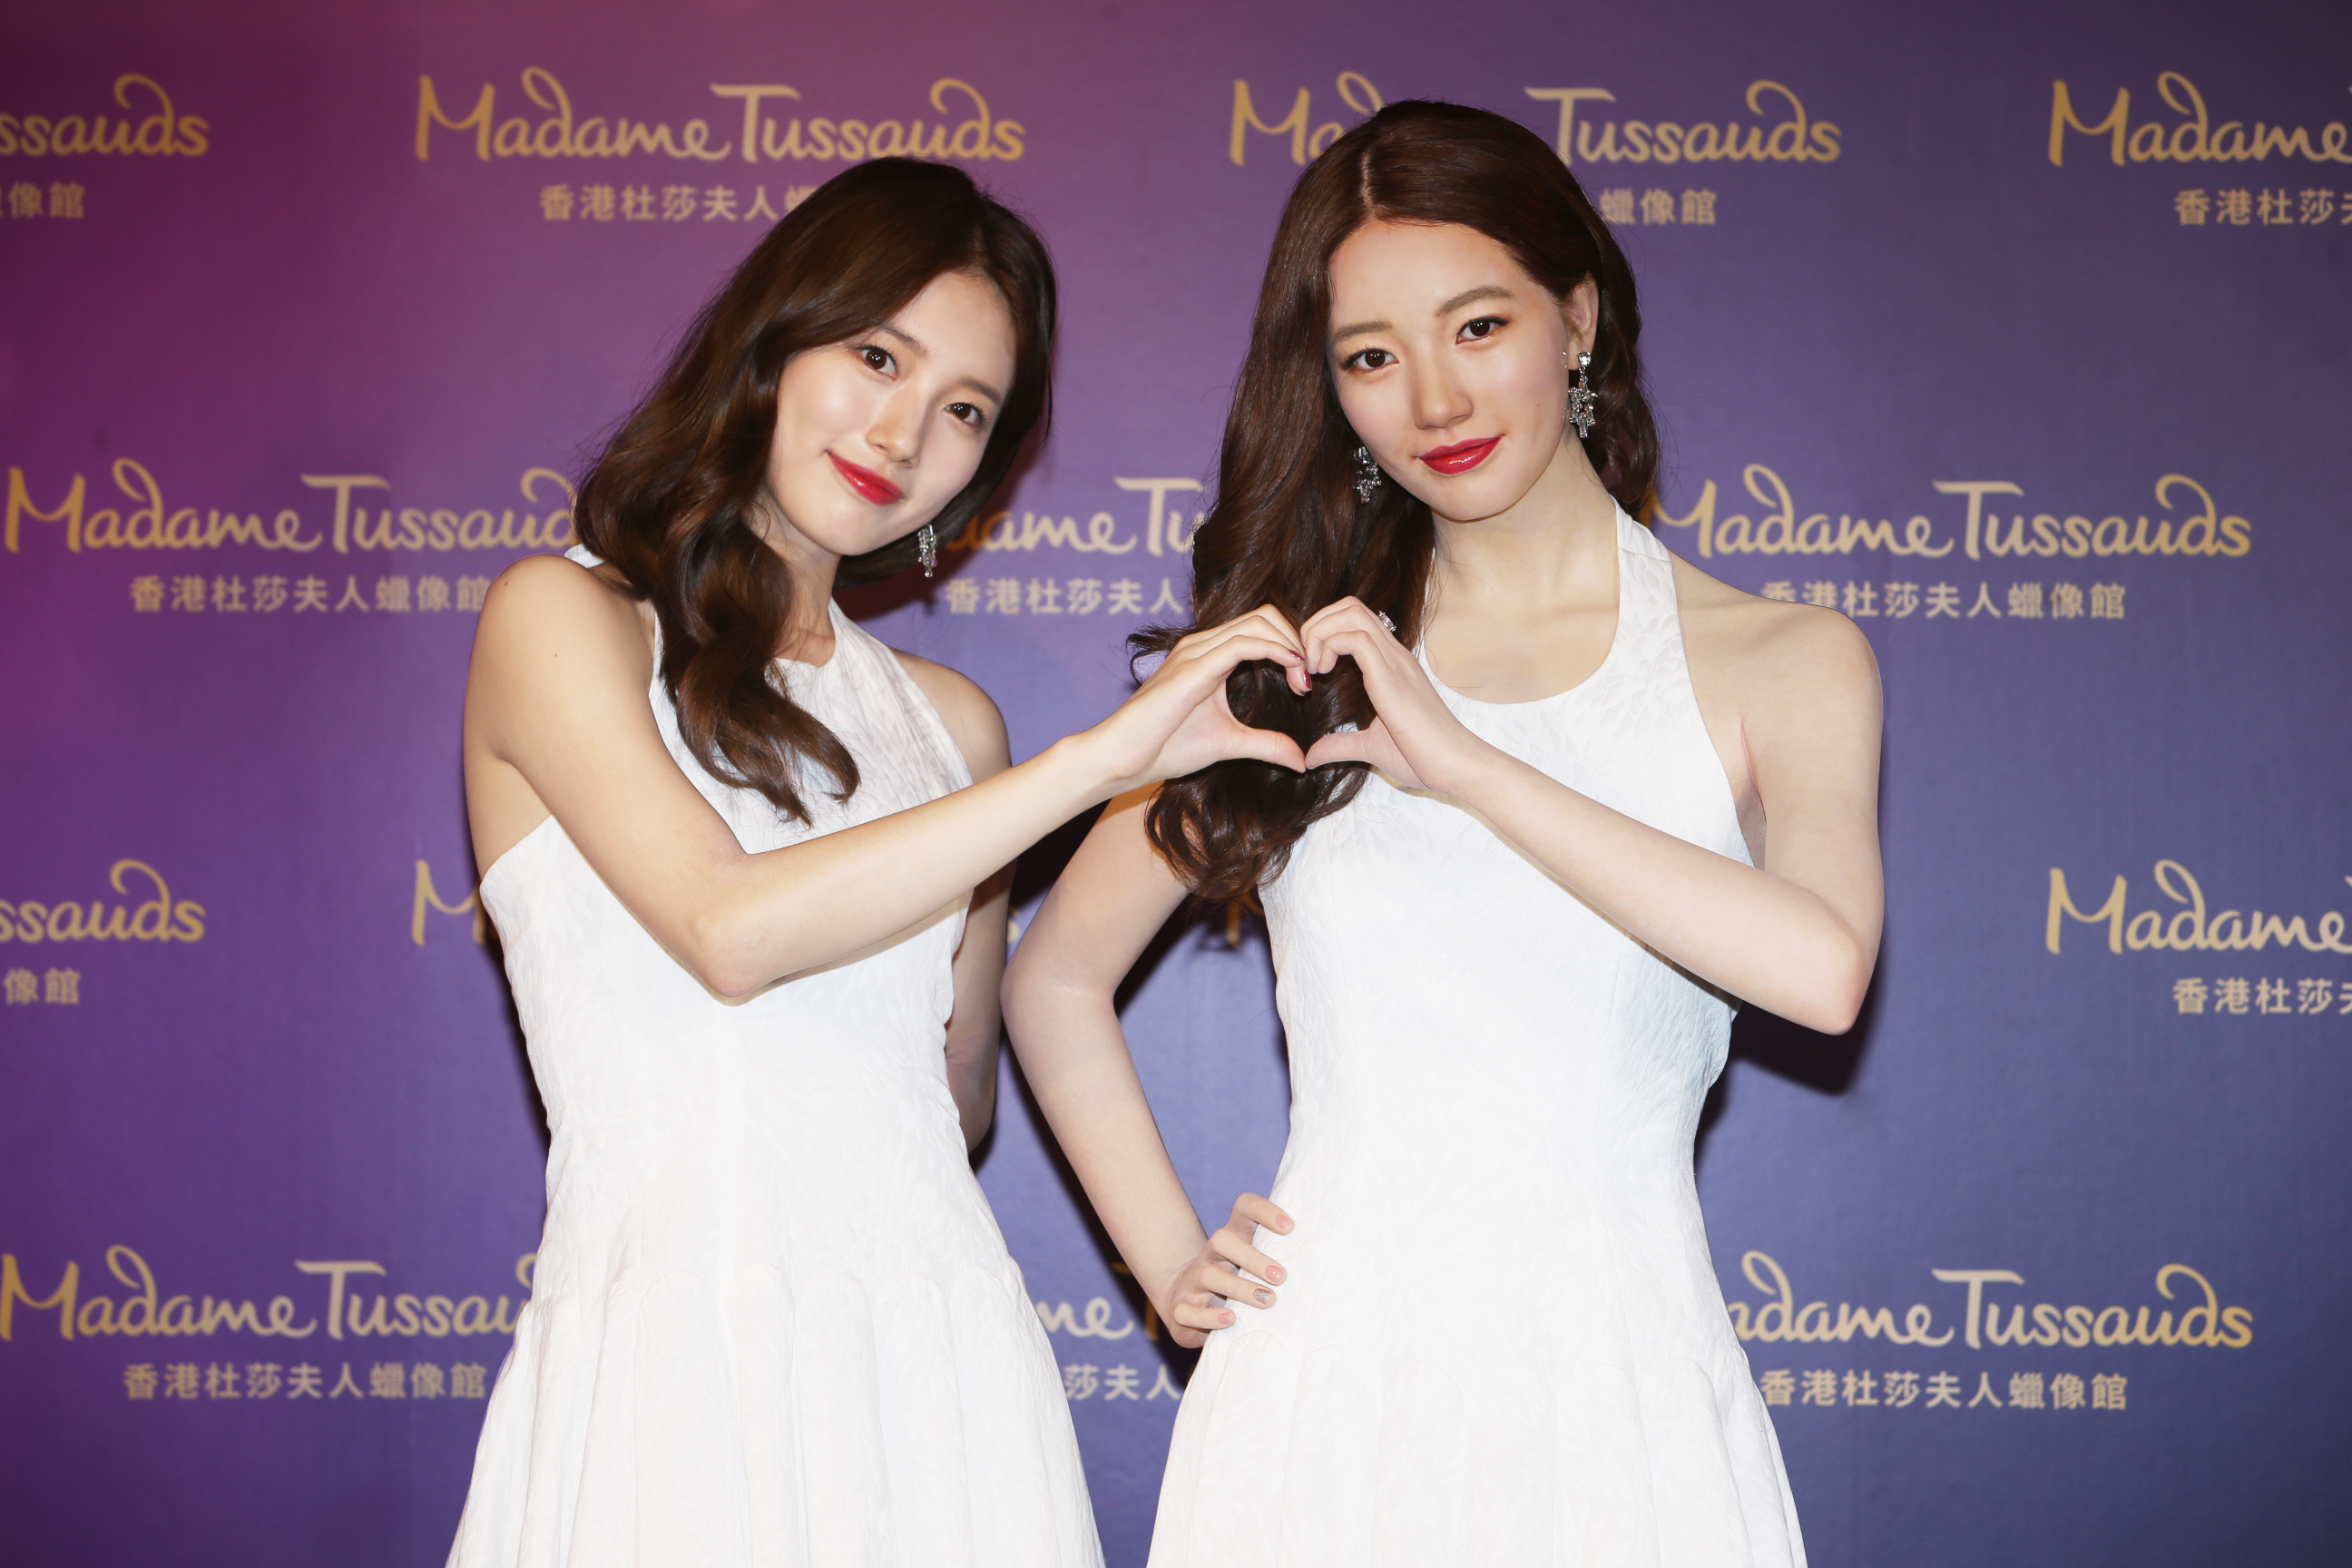 Image of South Korean actress and singer, Suzy, posing with her wax figure at a Madame Tussauds Hong Kong event